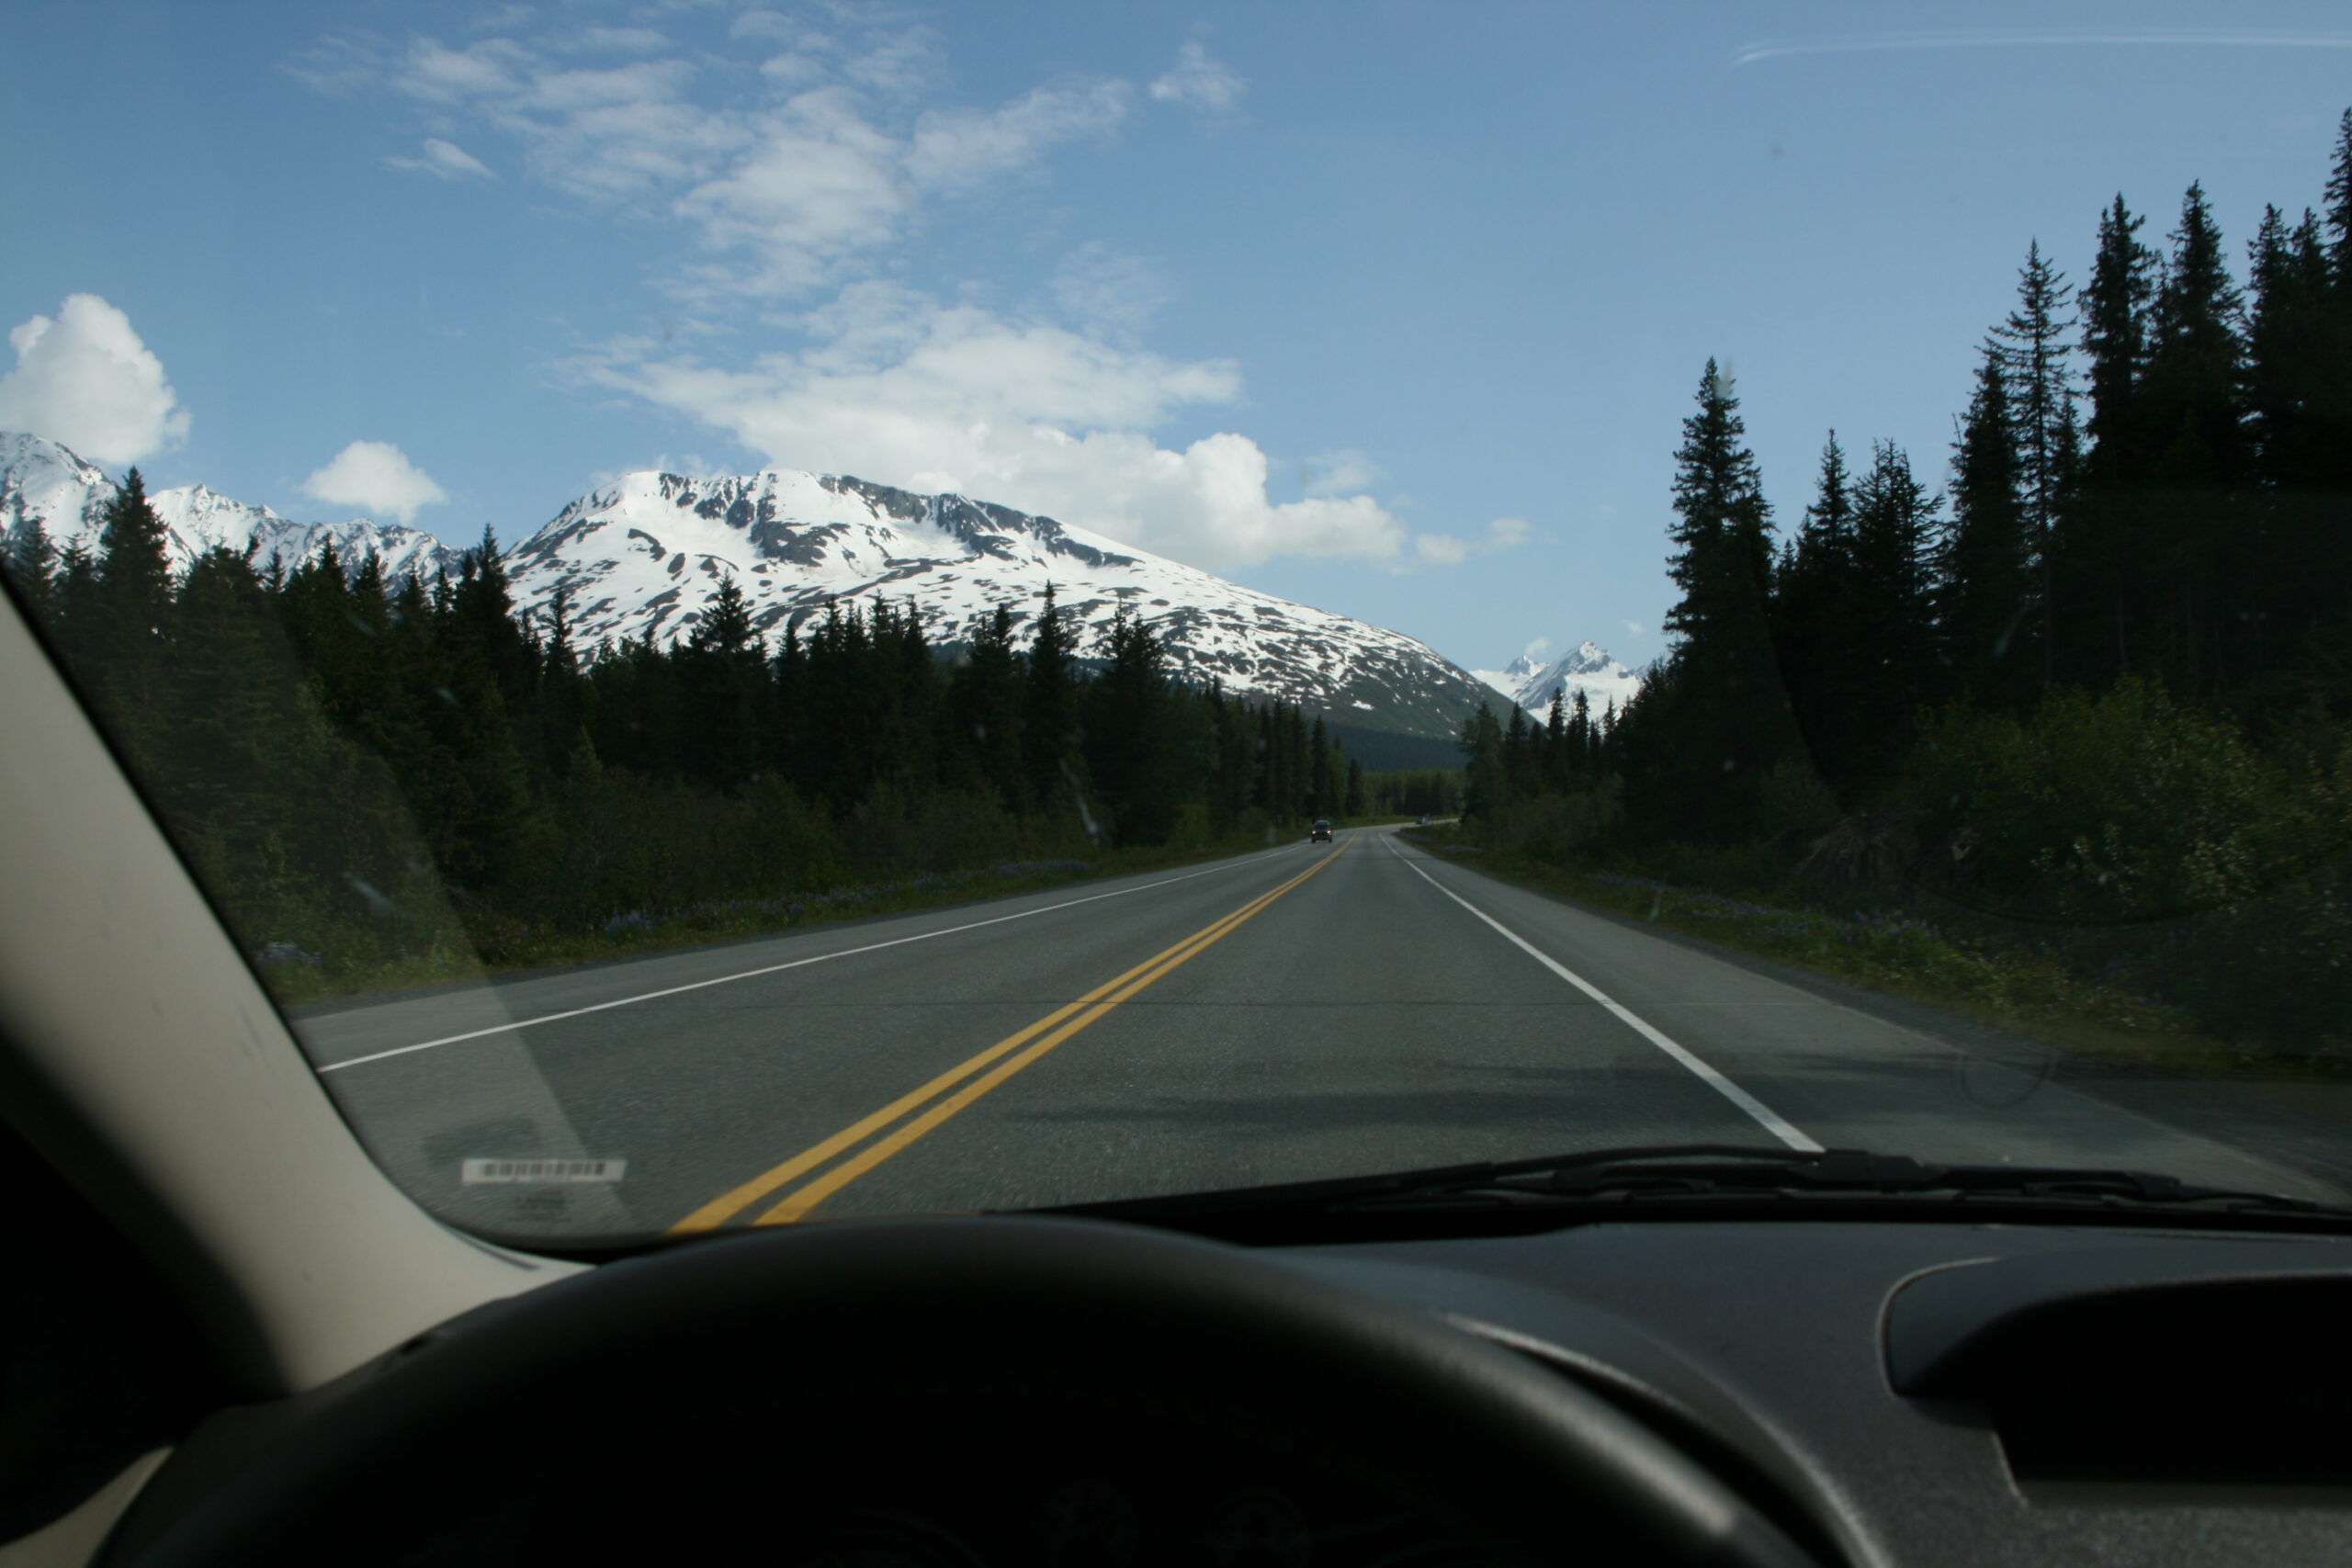 The Seward Highway is one of the most beautiful roadways in the world.